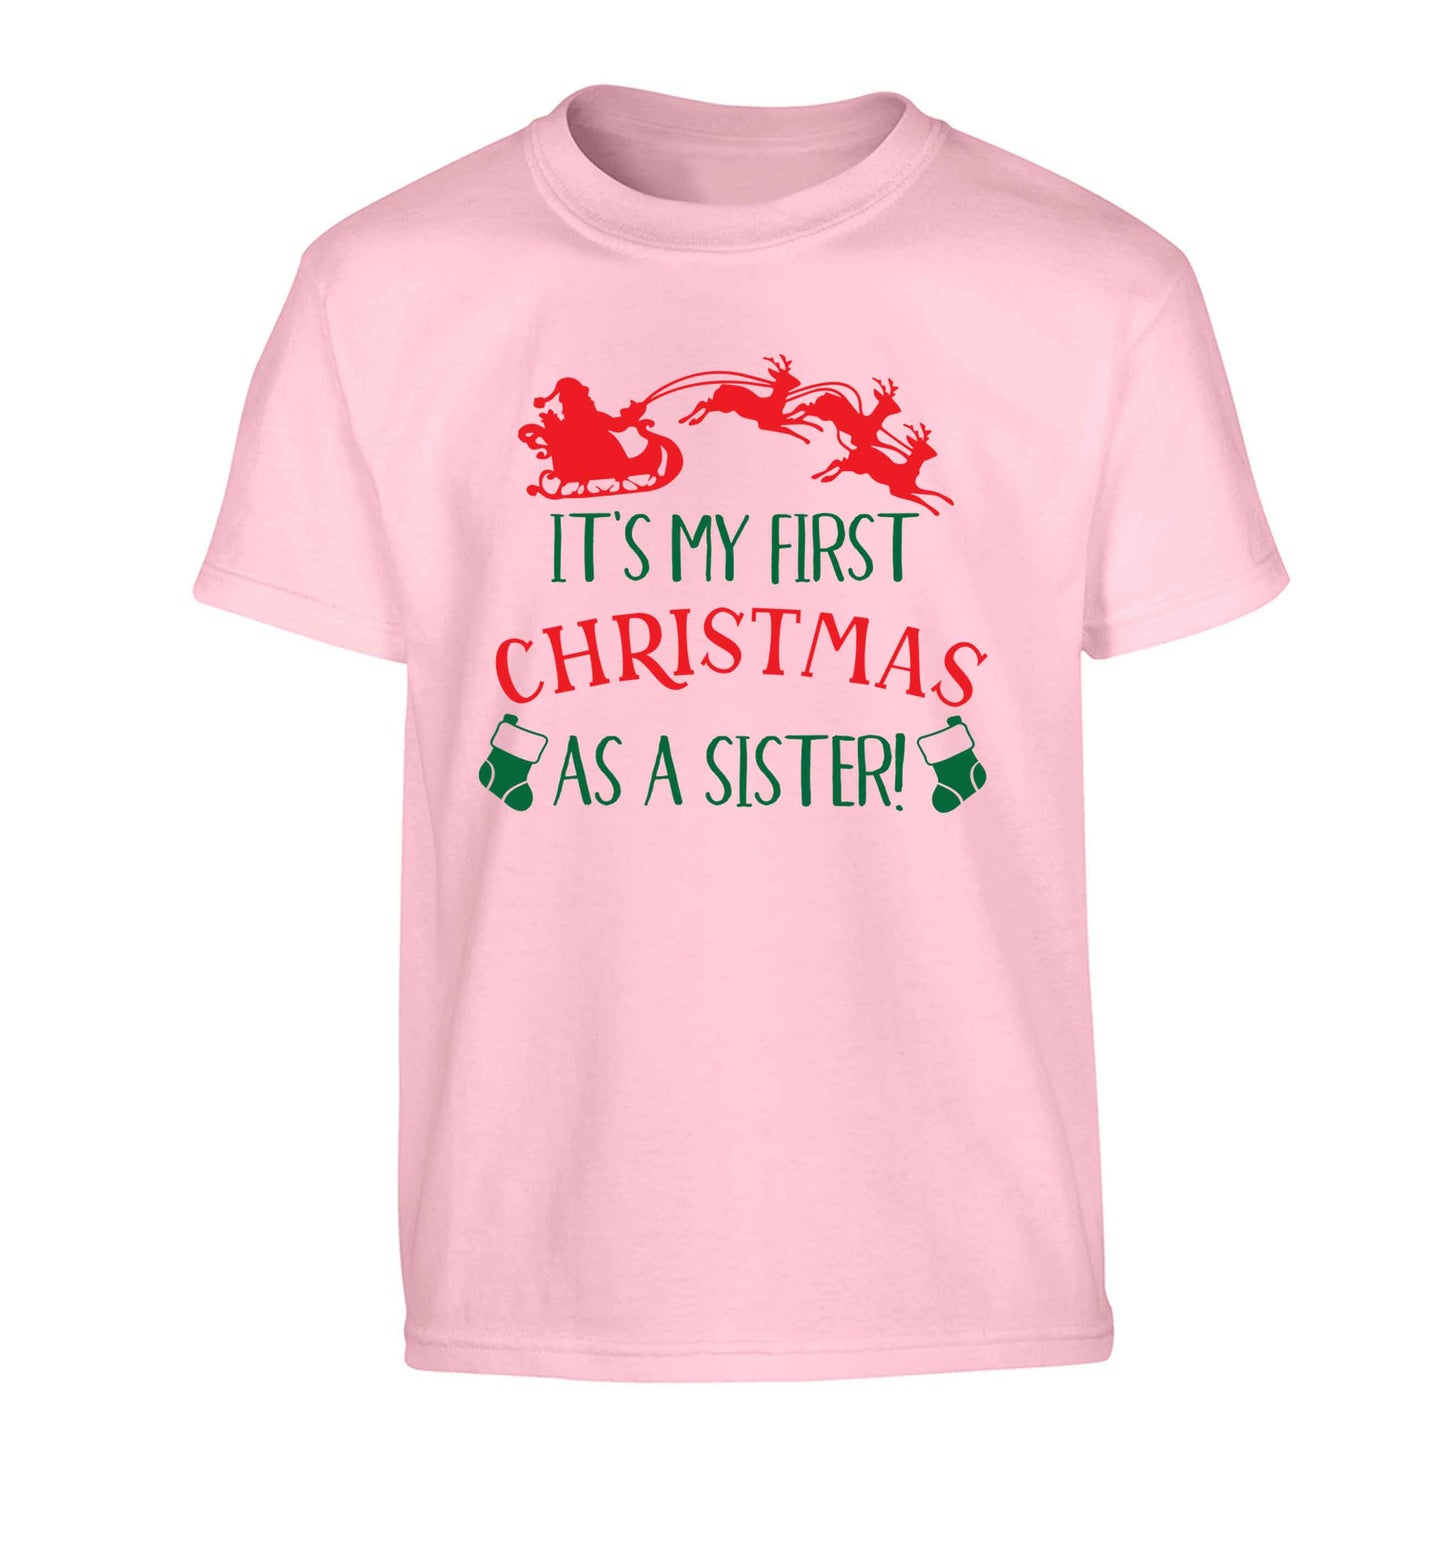 It's my first Christmas as a sister! Children's light pink Tshirt 12-13 Years